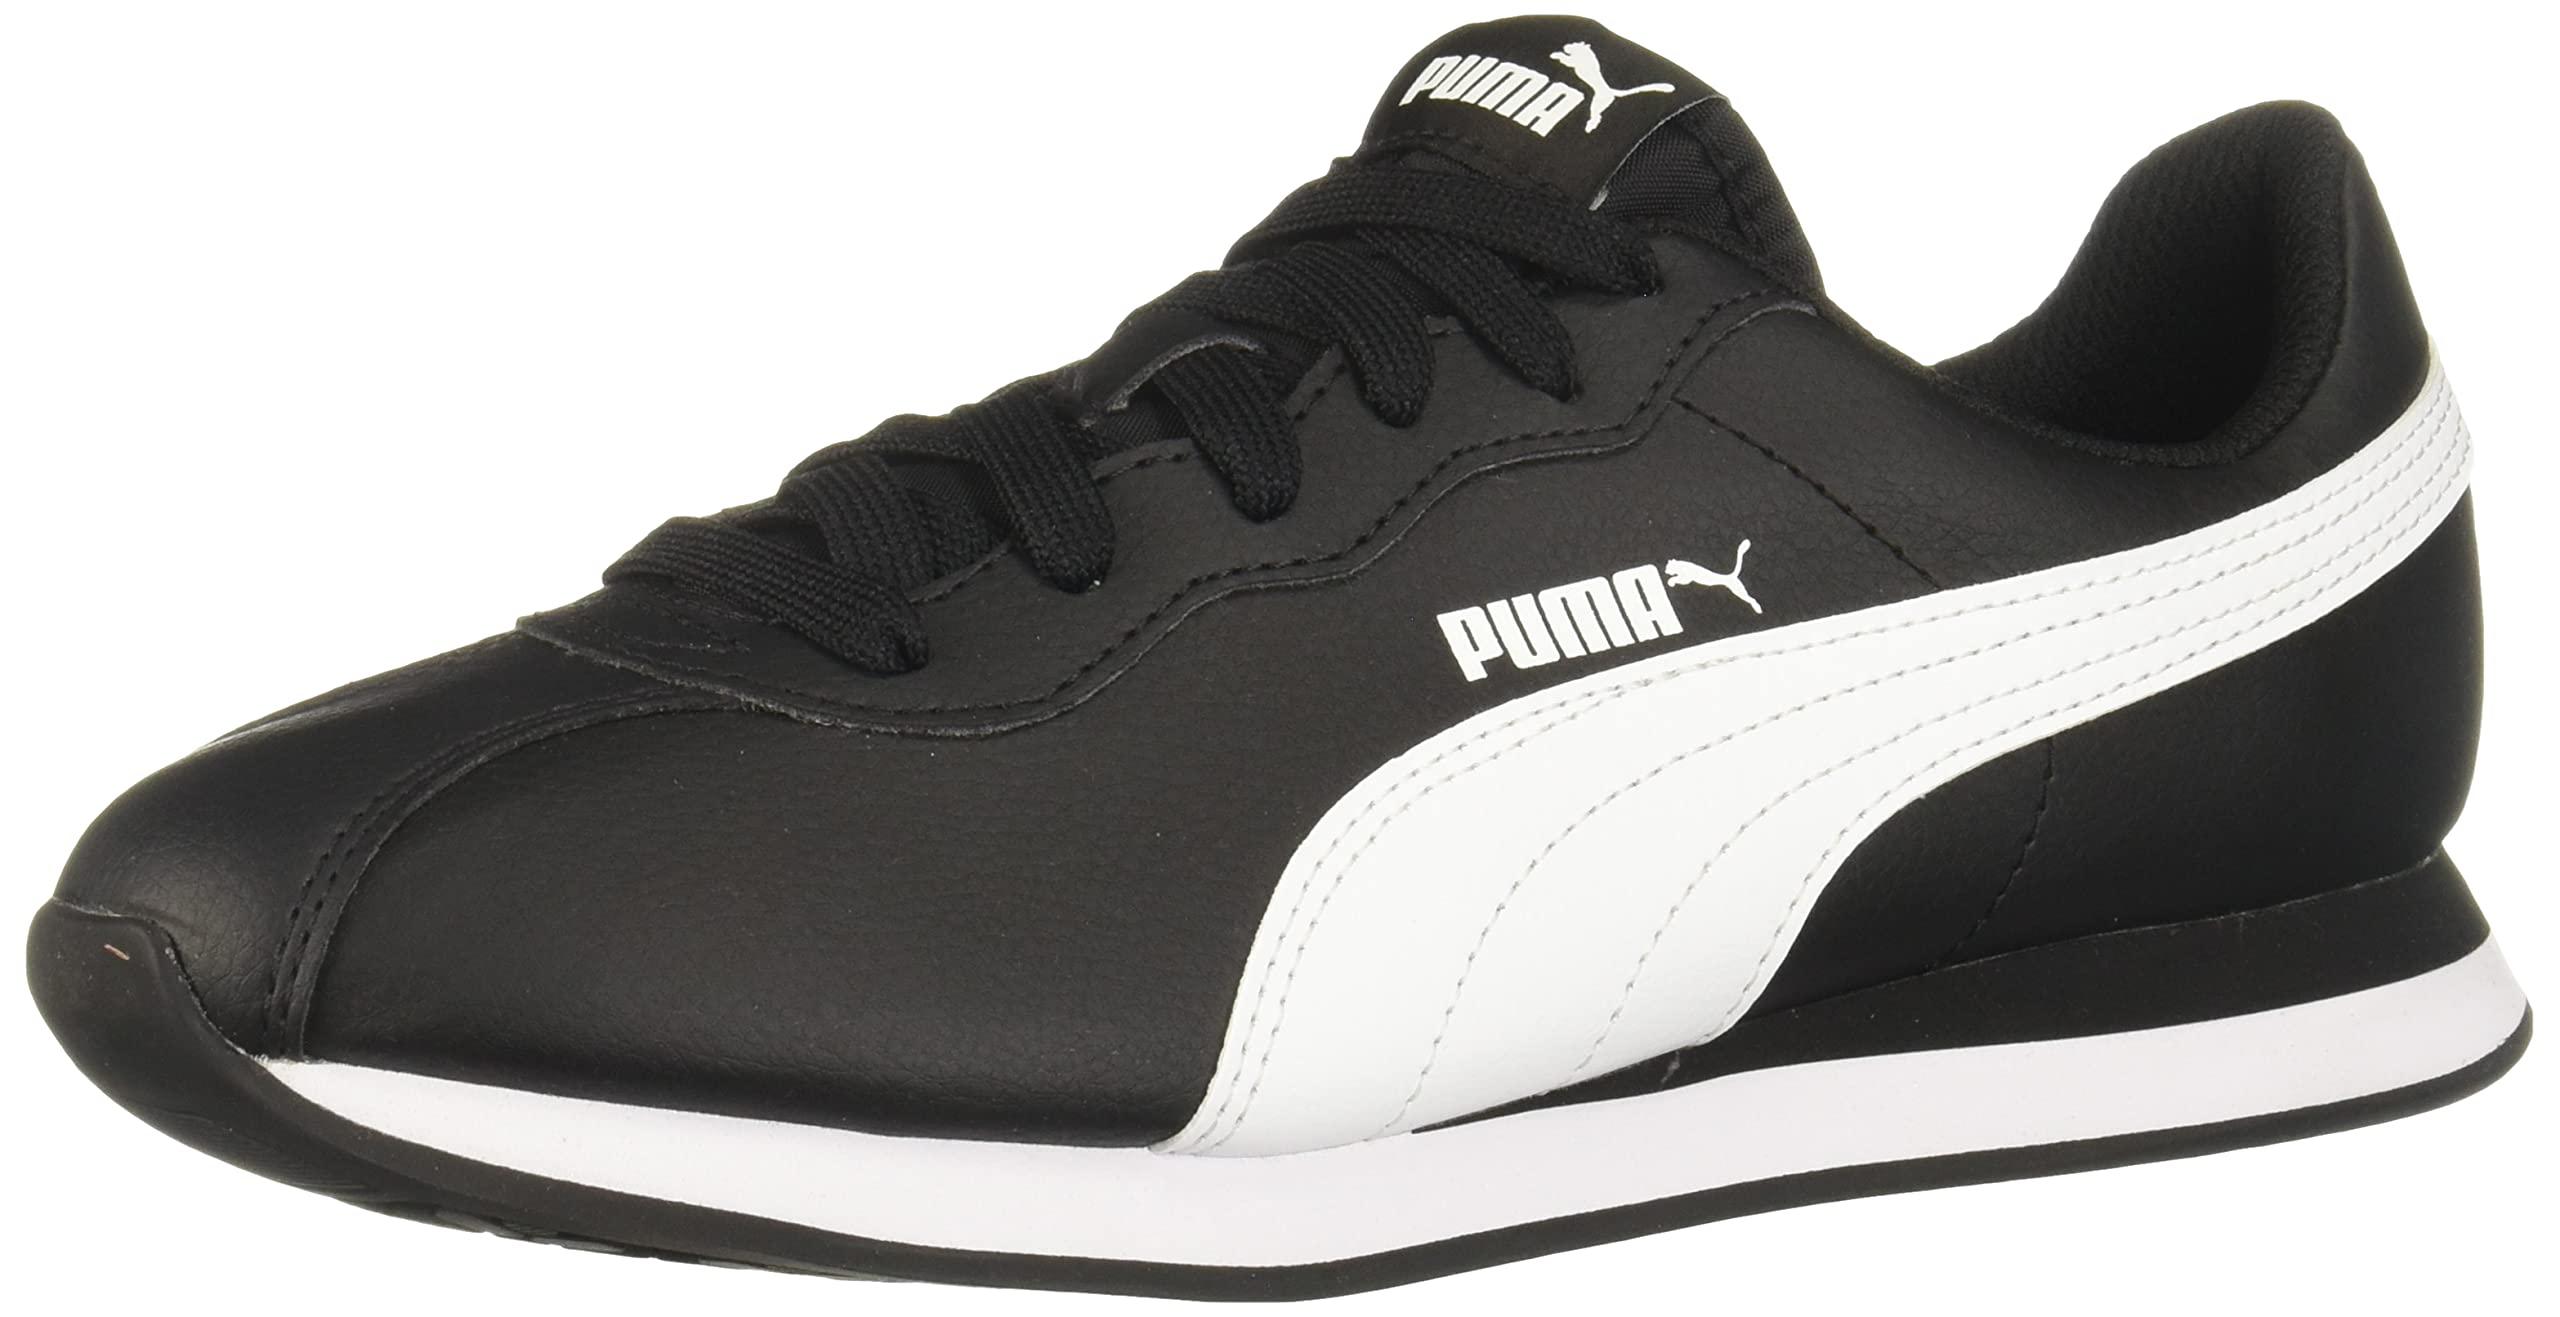 PUMA Synthetic Turin Ii Fitness Shoes in Black/White (Black) for Men | Lyst